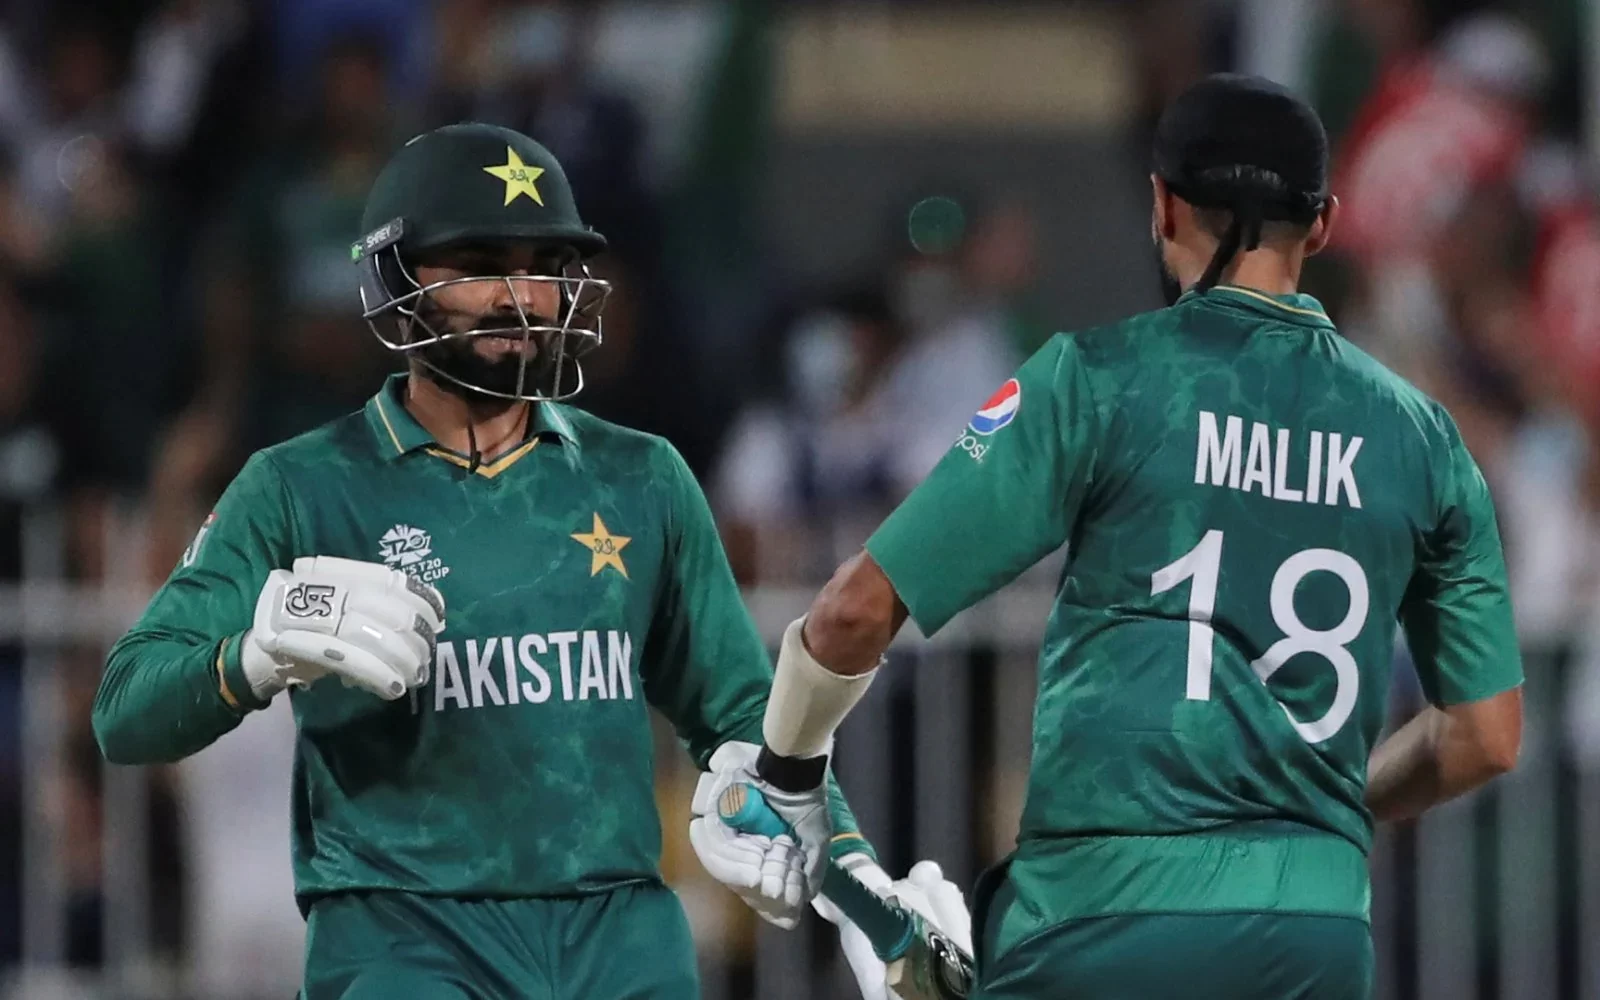 ICC T20 World Cup 2021: Shoiab Malik and Asif Ali.